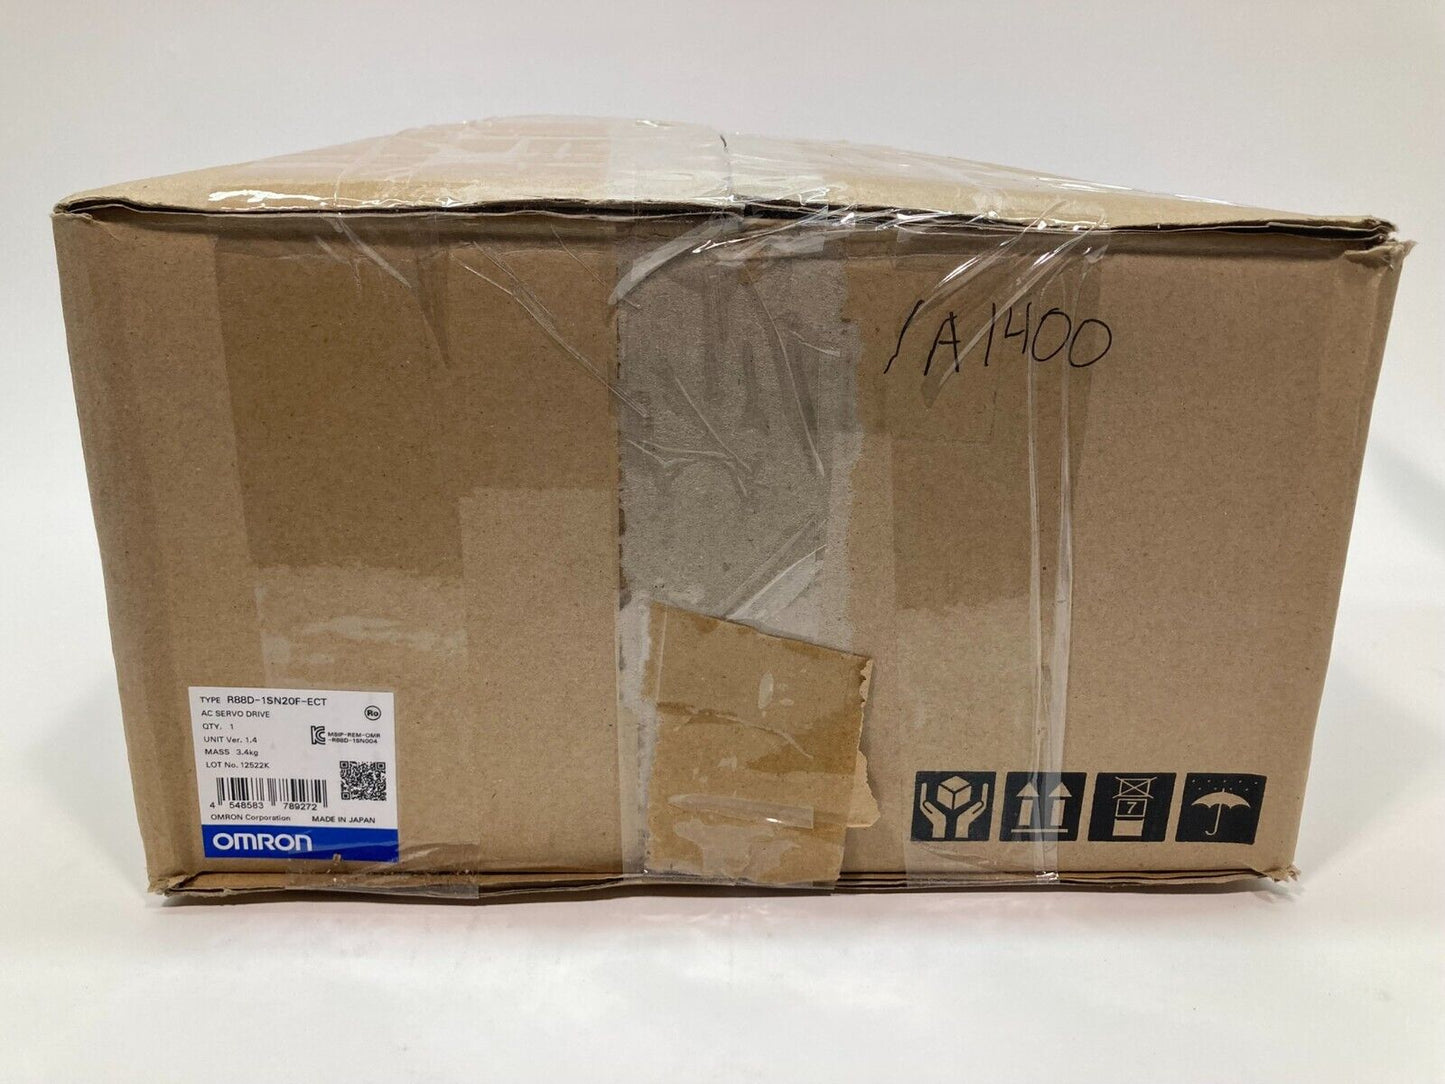 OMRON R88D-1SN20F-ECT / R88D1SN20FECT, New in box, Overnight Available